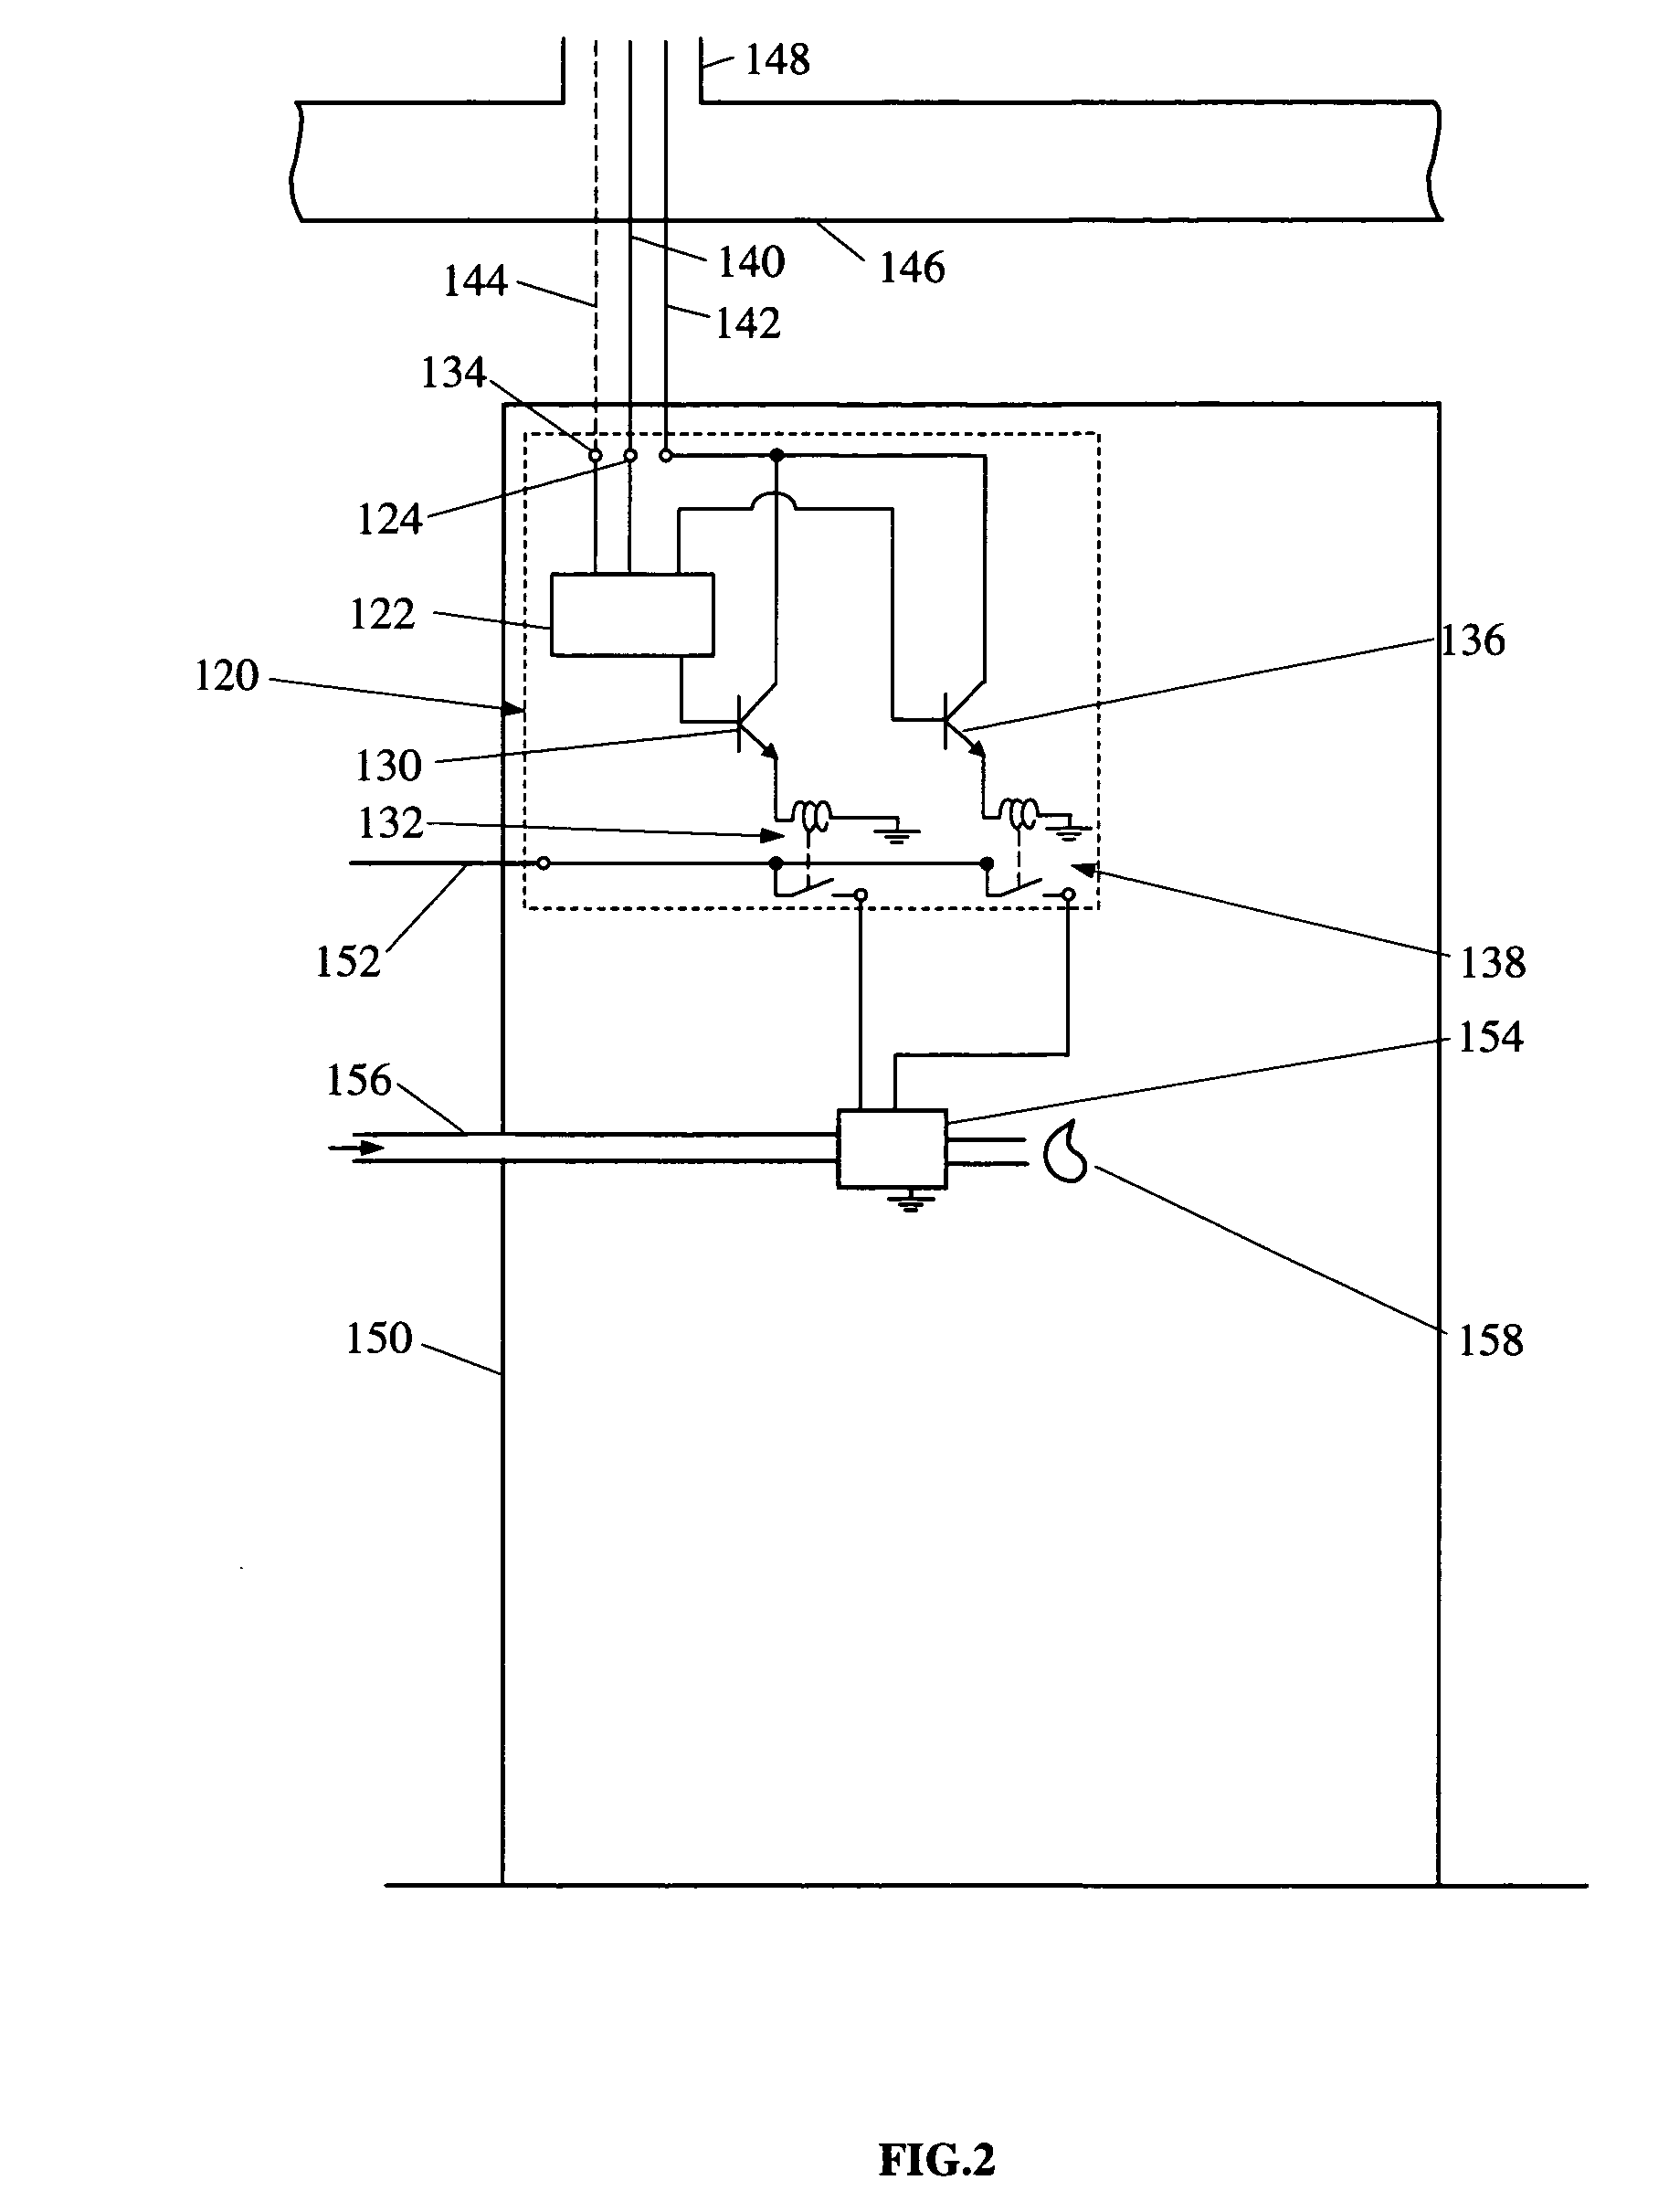 Controller for two-stage heat source usable with single and two stage thermostats